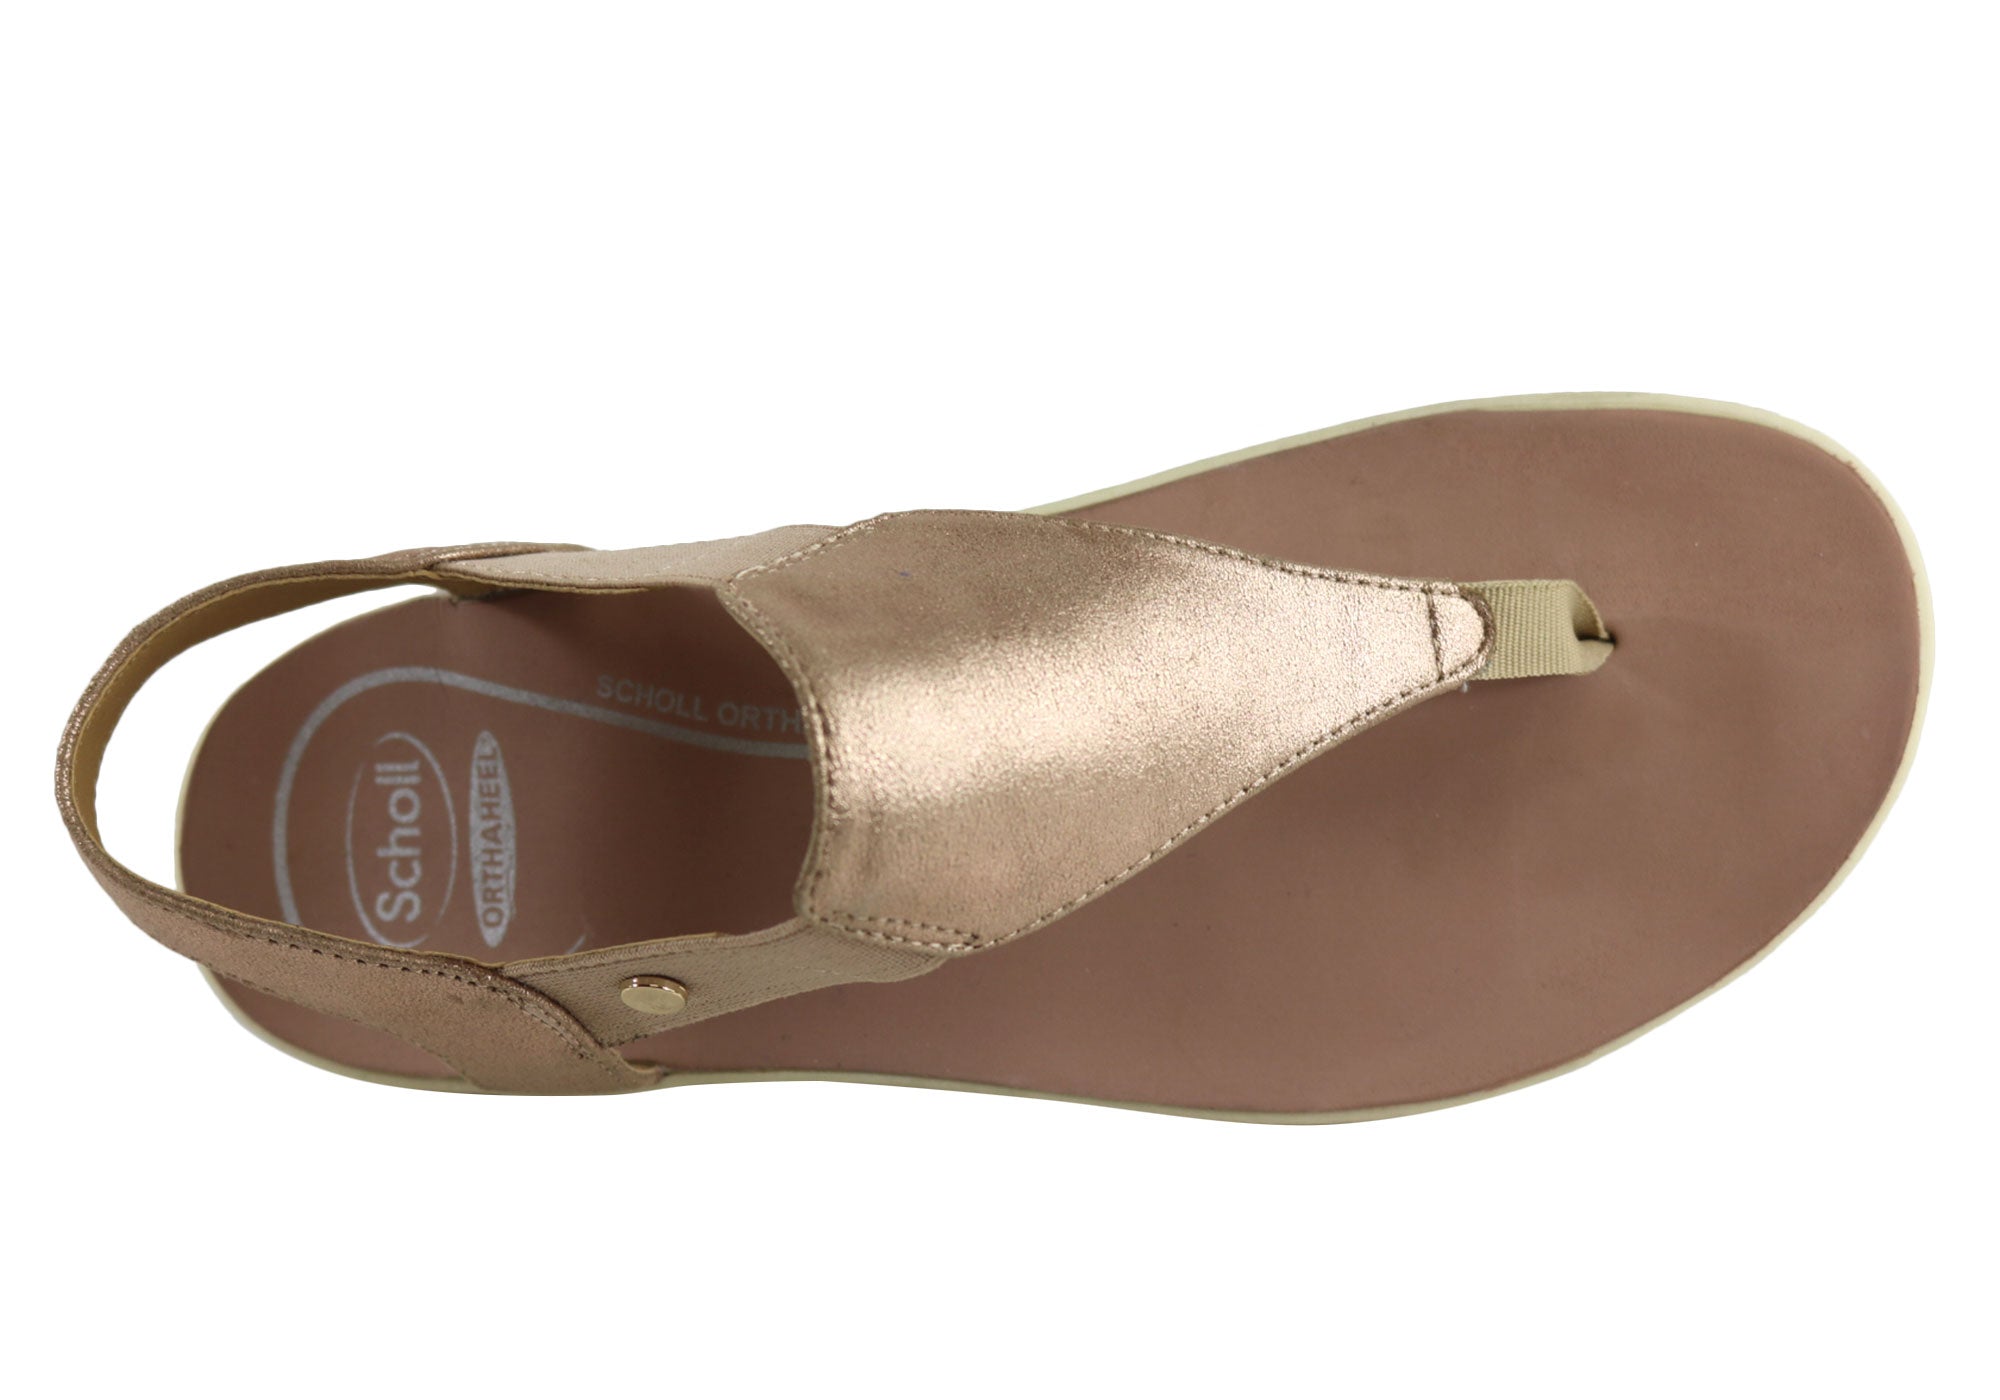 NEW SCHOLL ORTHAHEEL KRYSTAL WOMENS COMFORT THONG SANDALS WITH SUPPORT ...